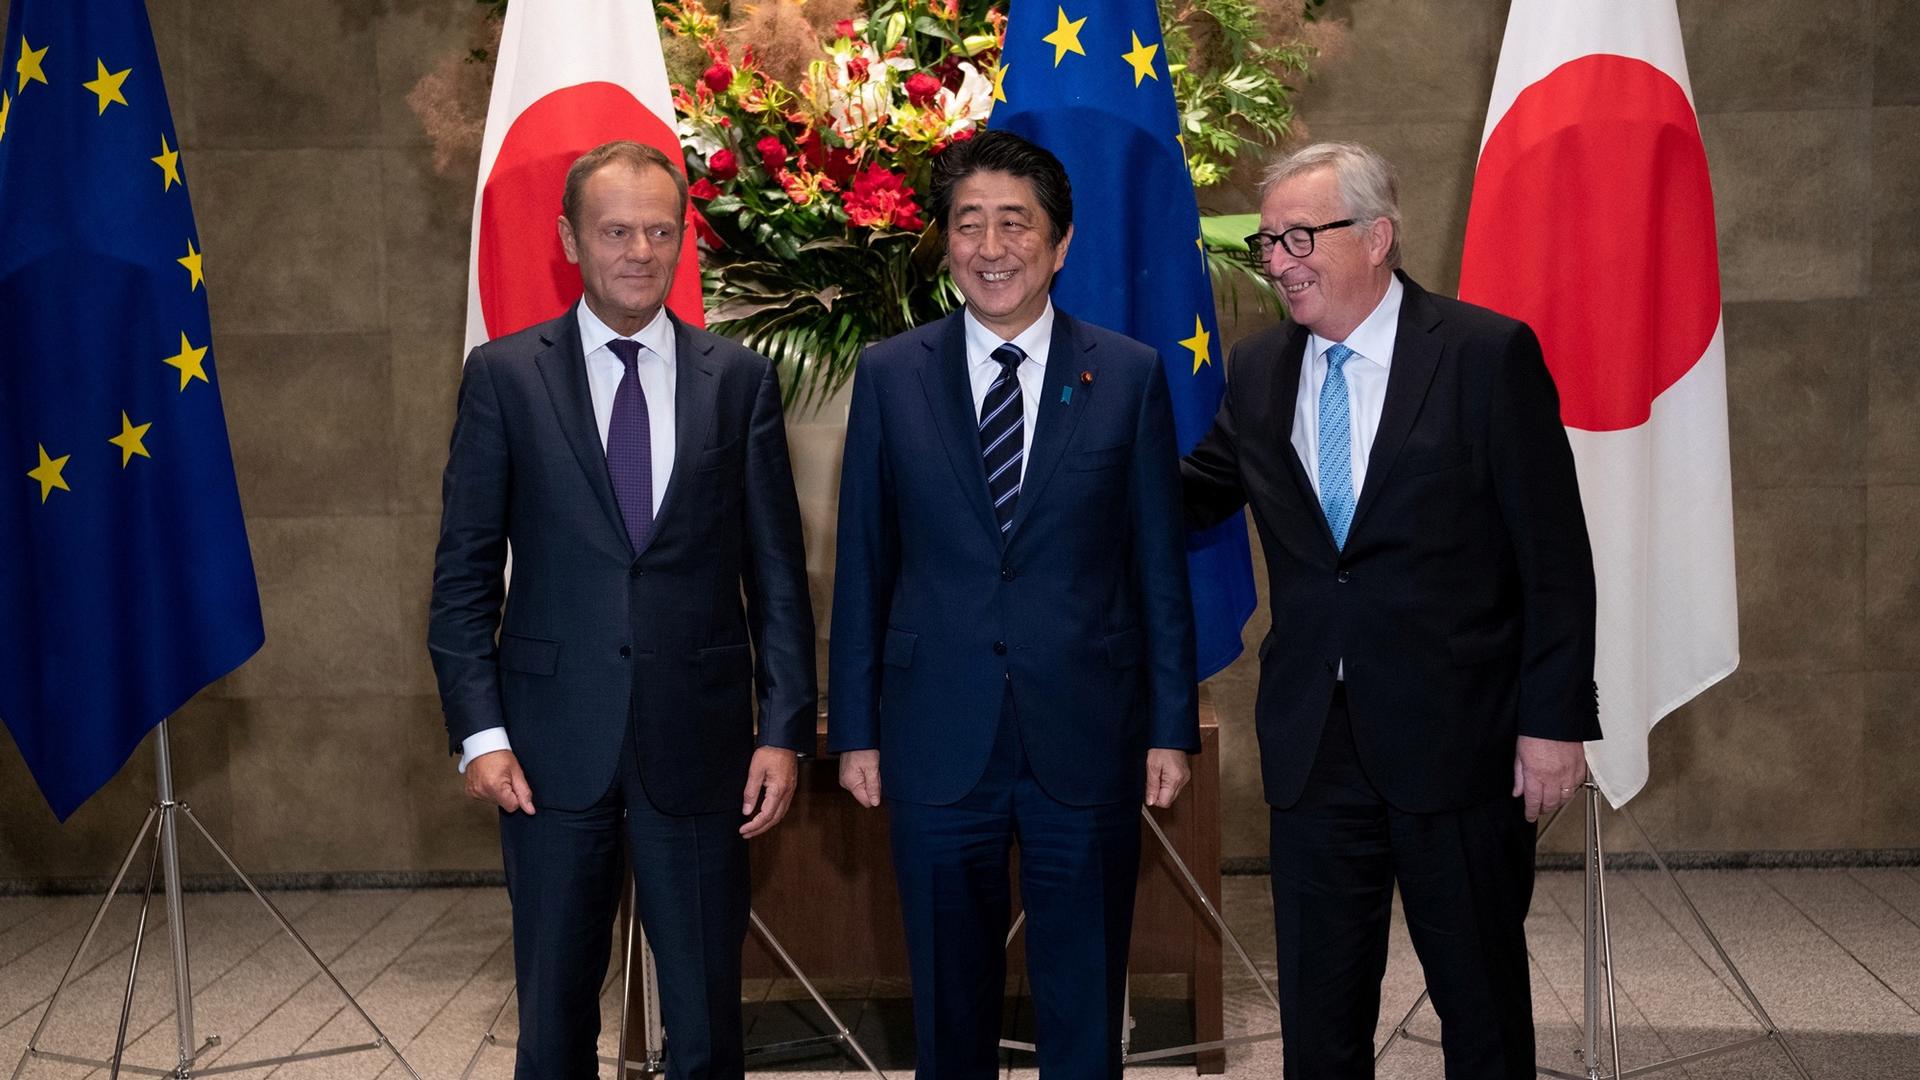 Japanese Prime Minister Shinzo Abe stands along side European Commission President Jean-Claude Juncker and European Council President Donald Tusk with EU and Japan flags behind them.